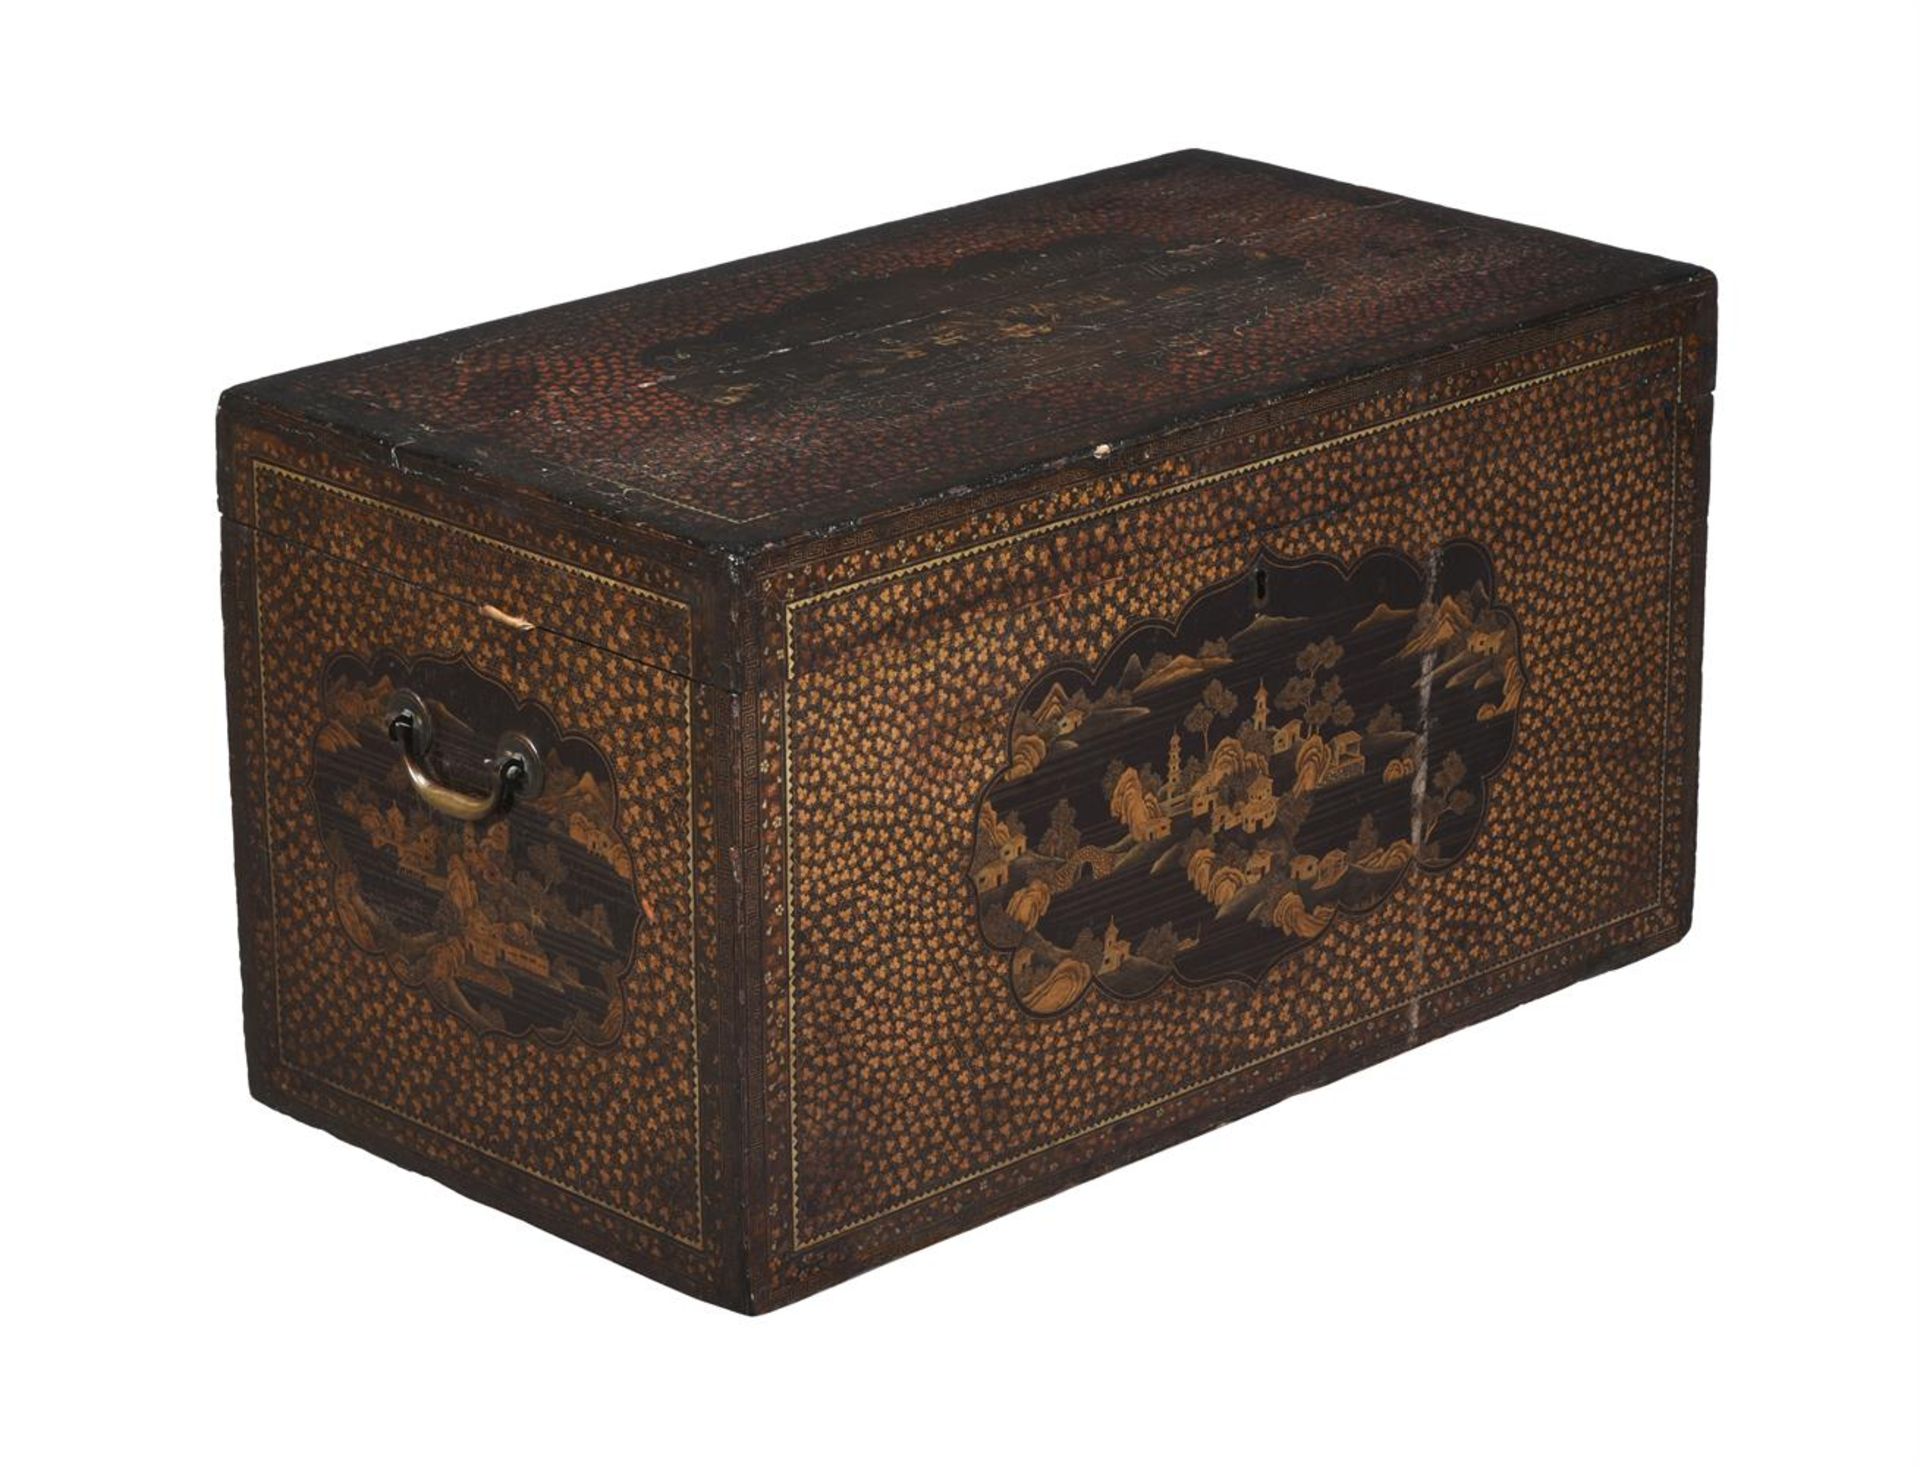 A CHINESE EXPORT BLACK LACQUER AND GILT DECORATED CHEST, LATE 18TH OR EARLY 19TH CENTURY